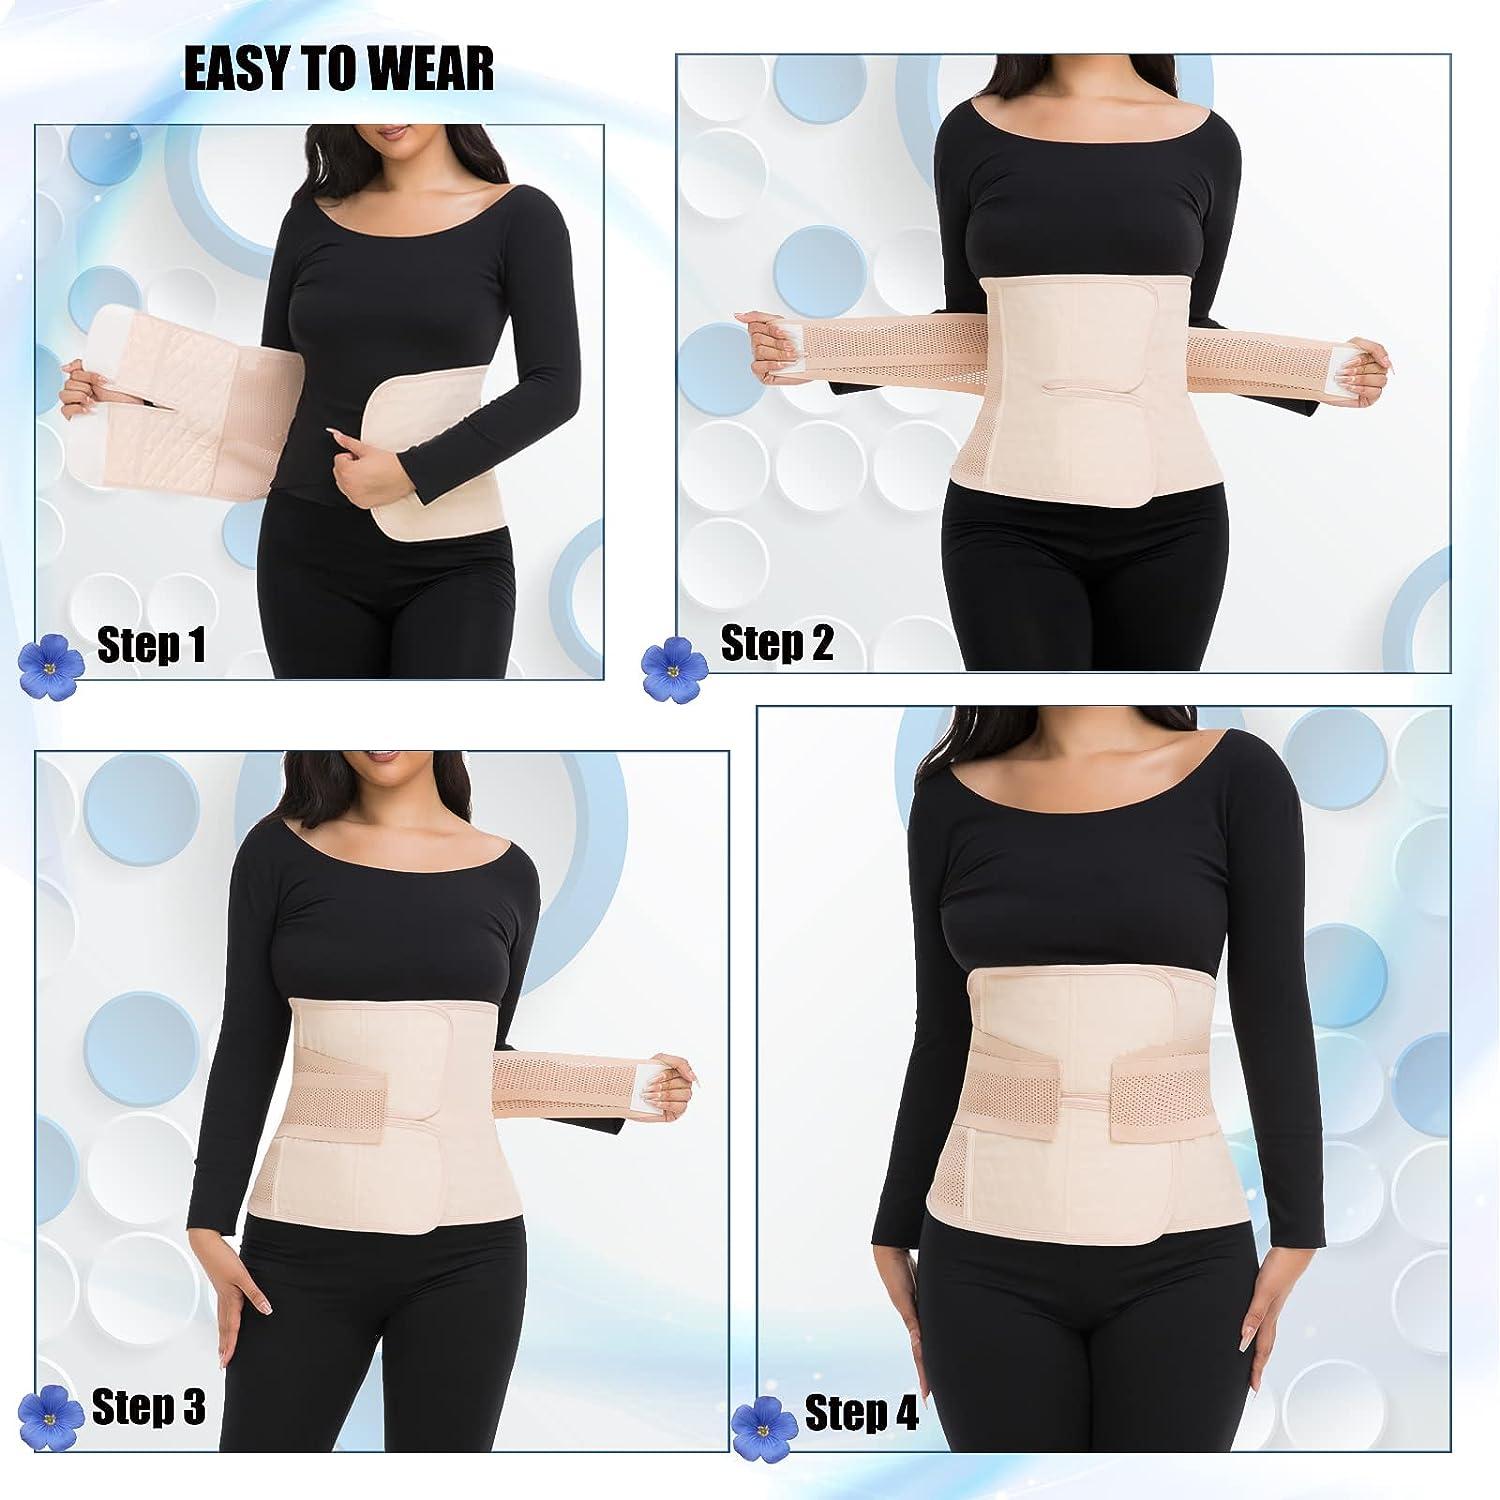 HOW TO WEAR A POSTPARTUM BELT FOR A FLAT TUMMY + PAIN MANAGEMENT